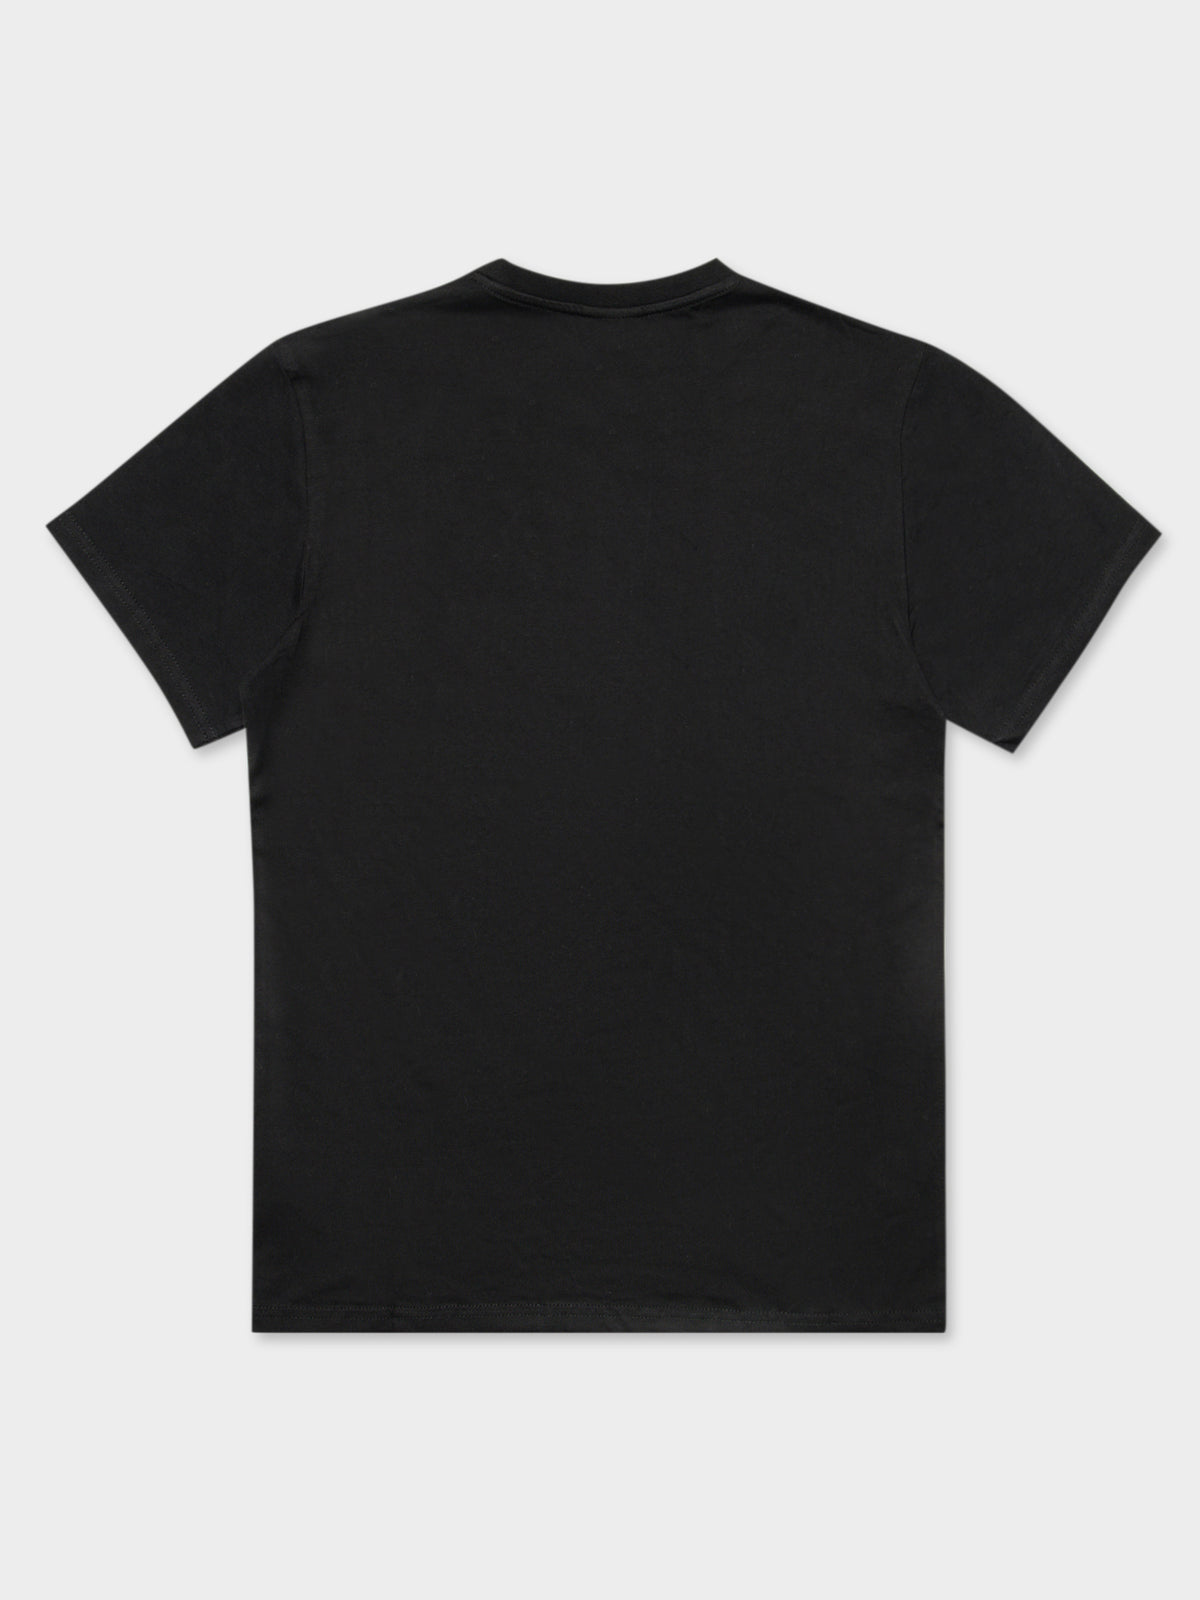 Albany T-Shirt in Black